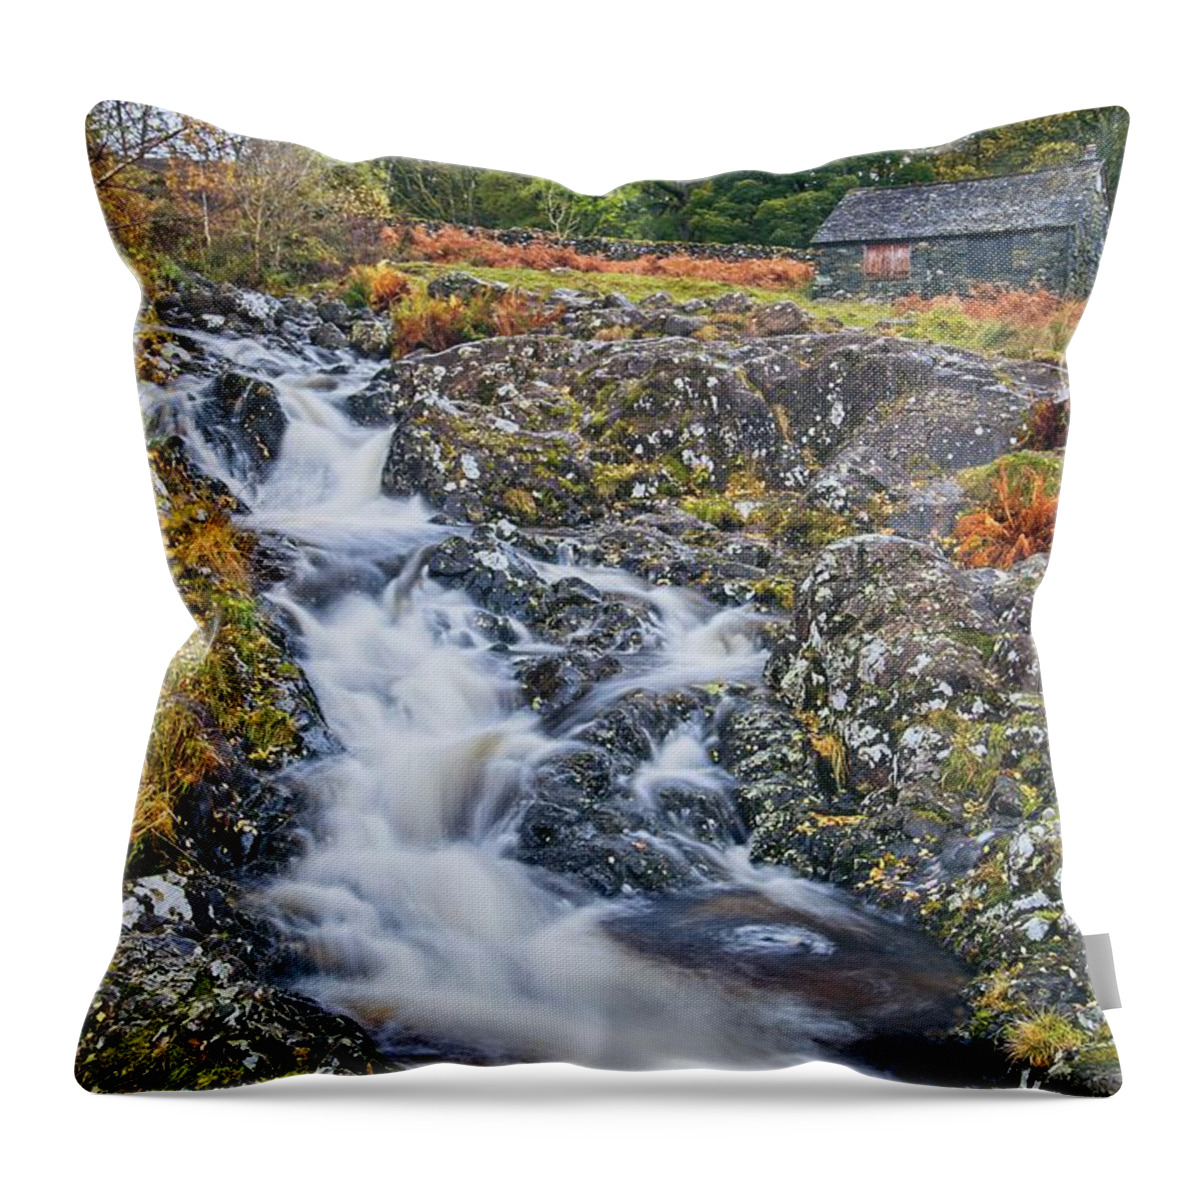 Ashness Bridge Throw Pillow featuring the photograph Lake District Waterfall #1 by Martyn Arnold